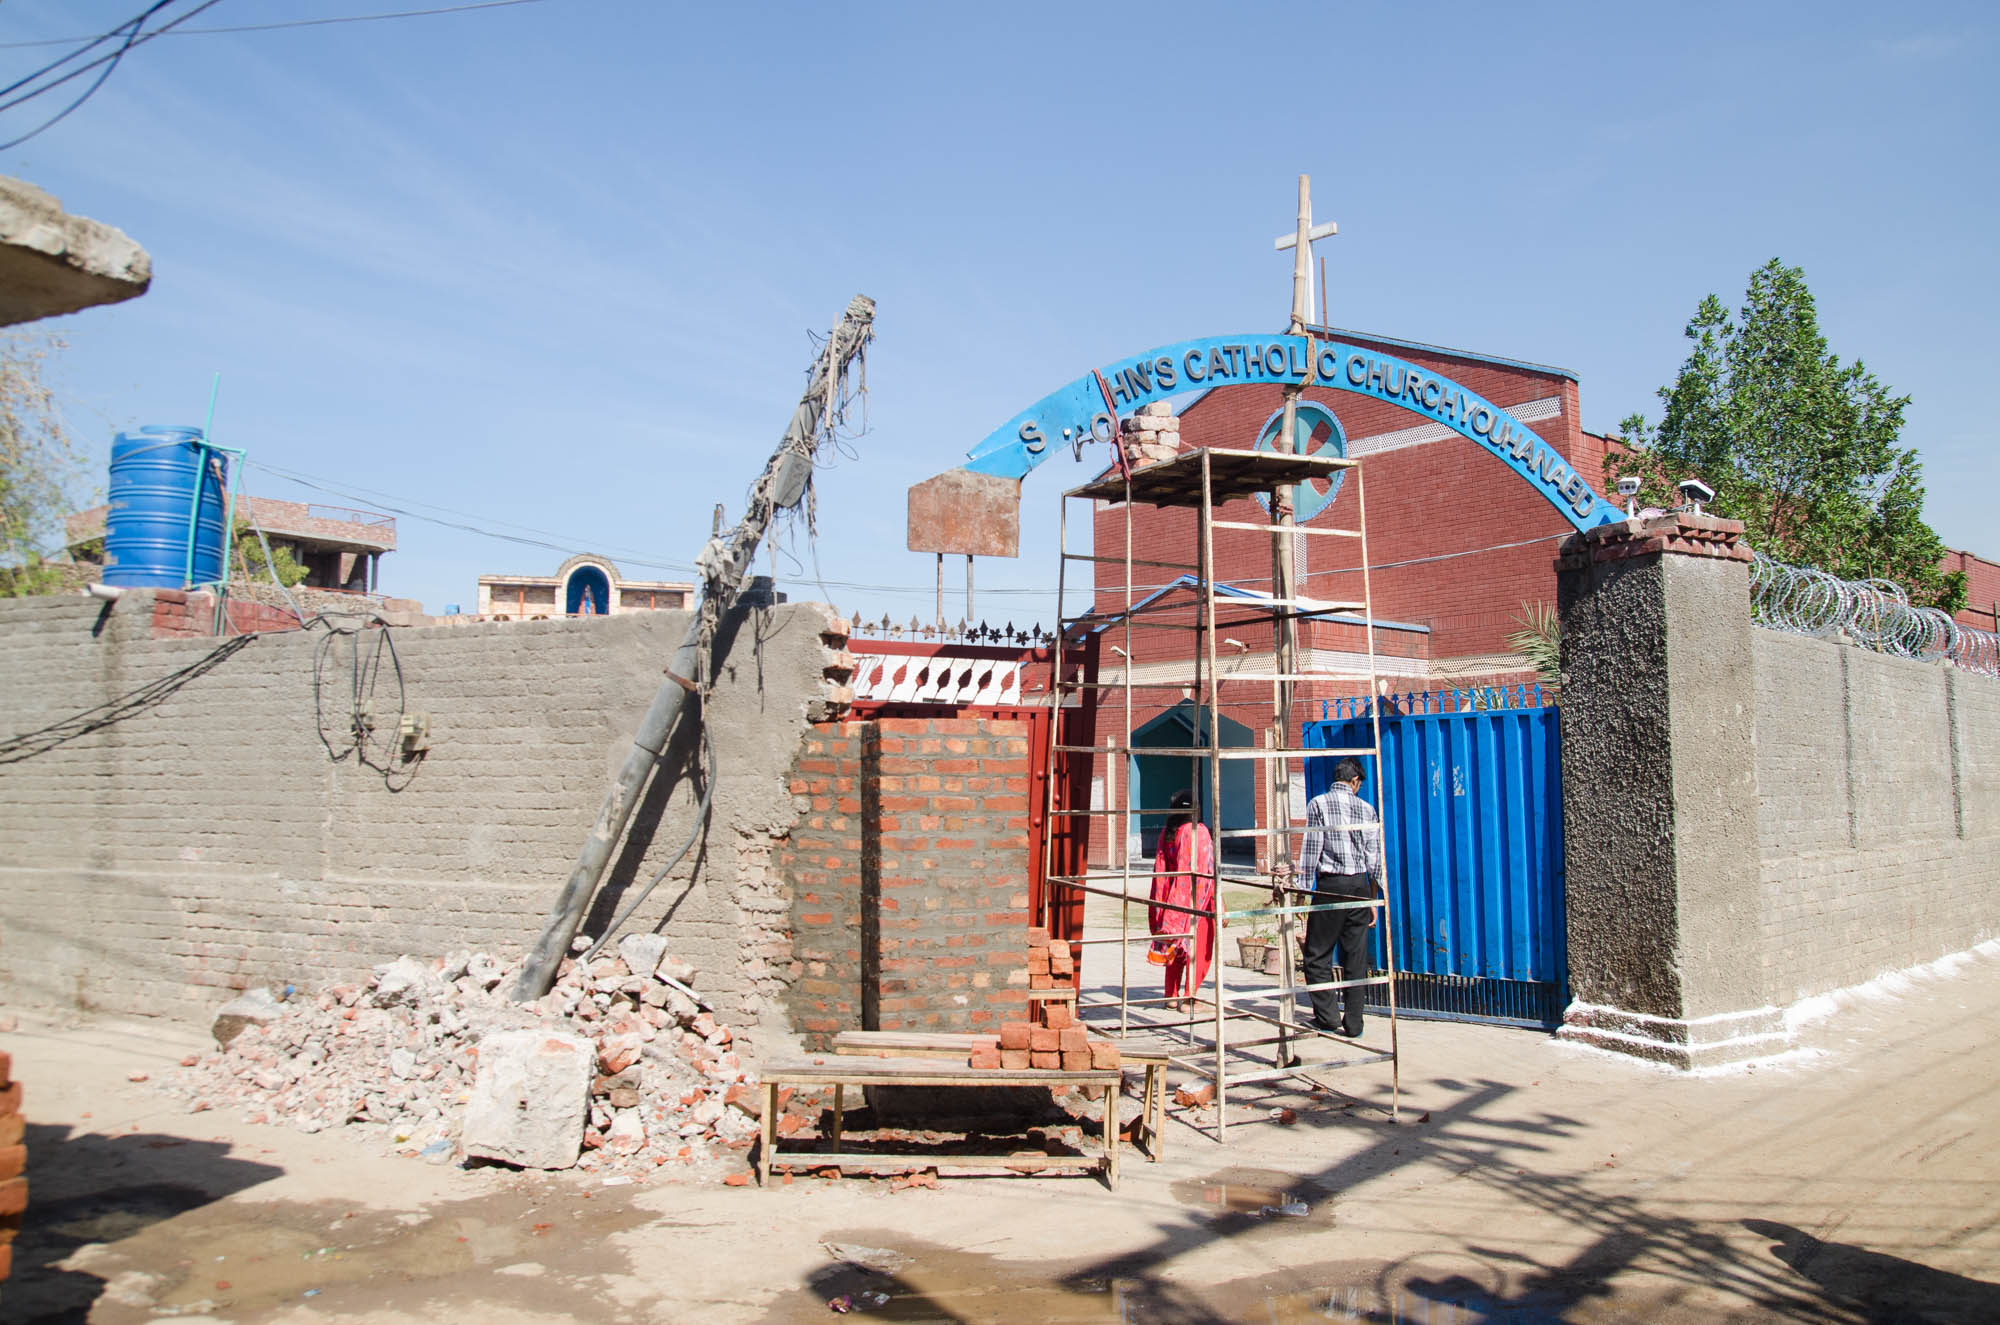  The wall of St. John’s Catholic Church being reconstructed after a suicide attack killed 15 including 2 police officers 